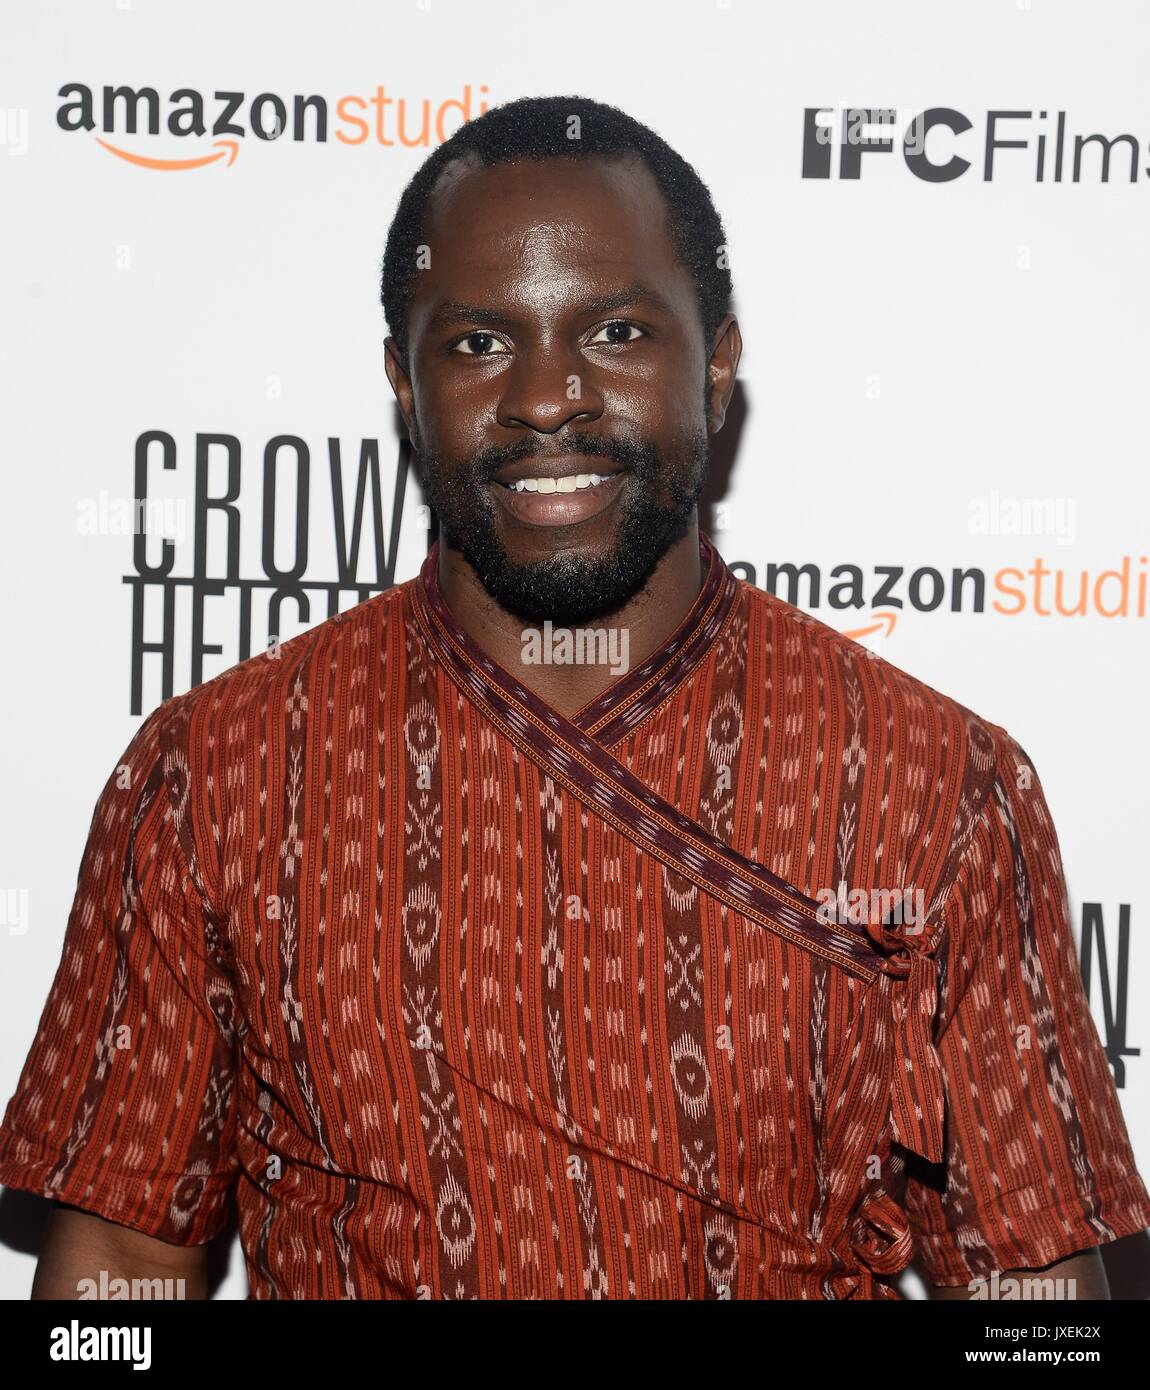 New York, NY, USA. 15th Aug, 2017. Gbenga Akinnagbe at arrivals for Amazon Studios' and IFC Films' CROWN HEIGHTS Premiere, Metrograph, New York, NY August 15, 2017. Credit: Eli Winston/Everett Collection/Alamy Live News Stock Photo